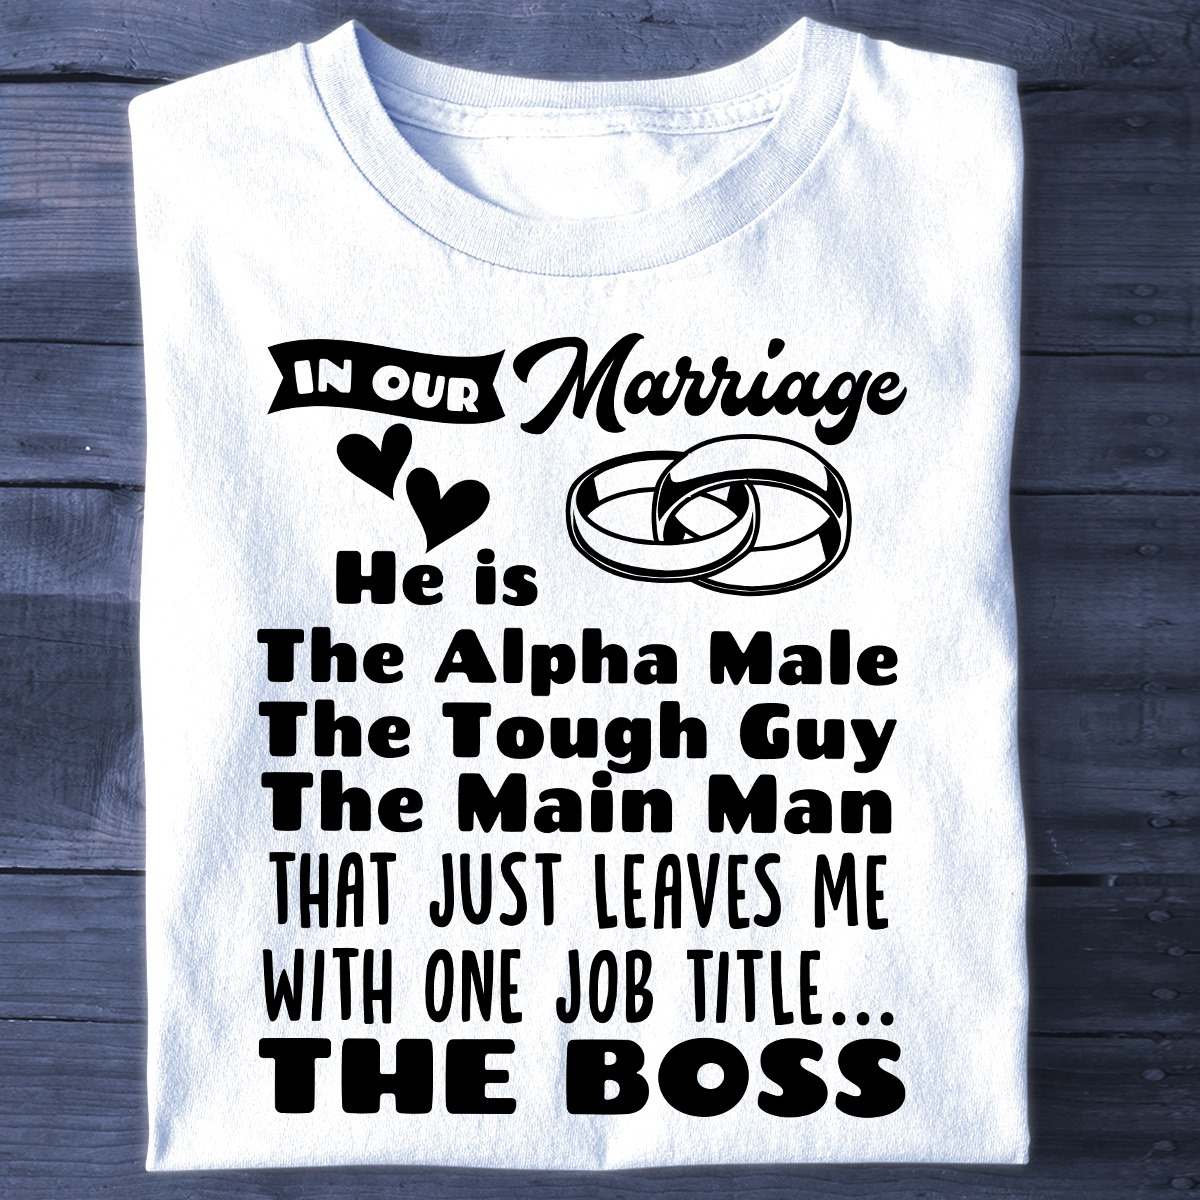 In our marriage he is the alpha male, the tough guy, the main man - Husband and wife